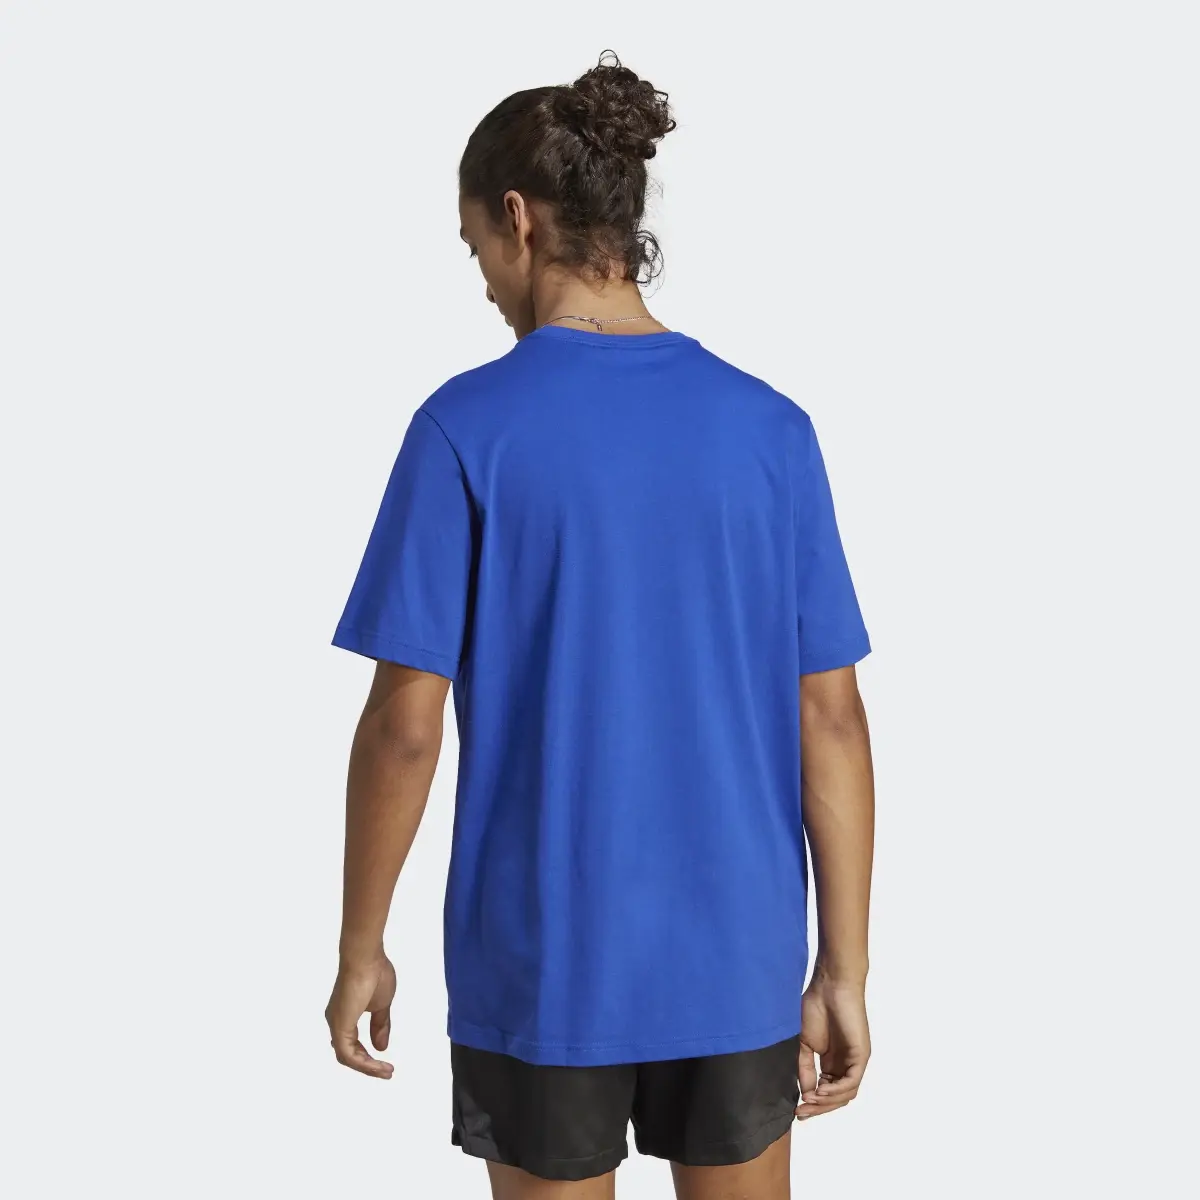 Adidas Essentials Single Jersey Embroidered Small Logo Tee. 3